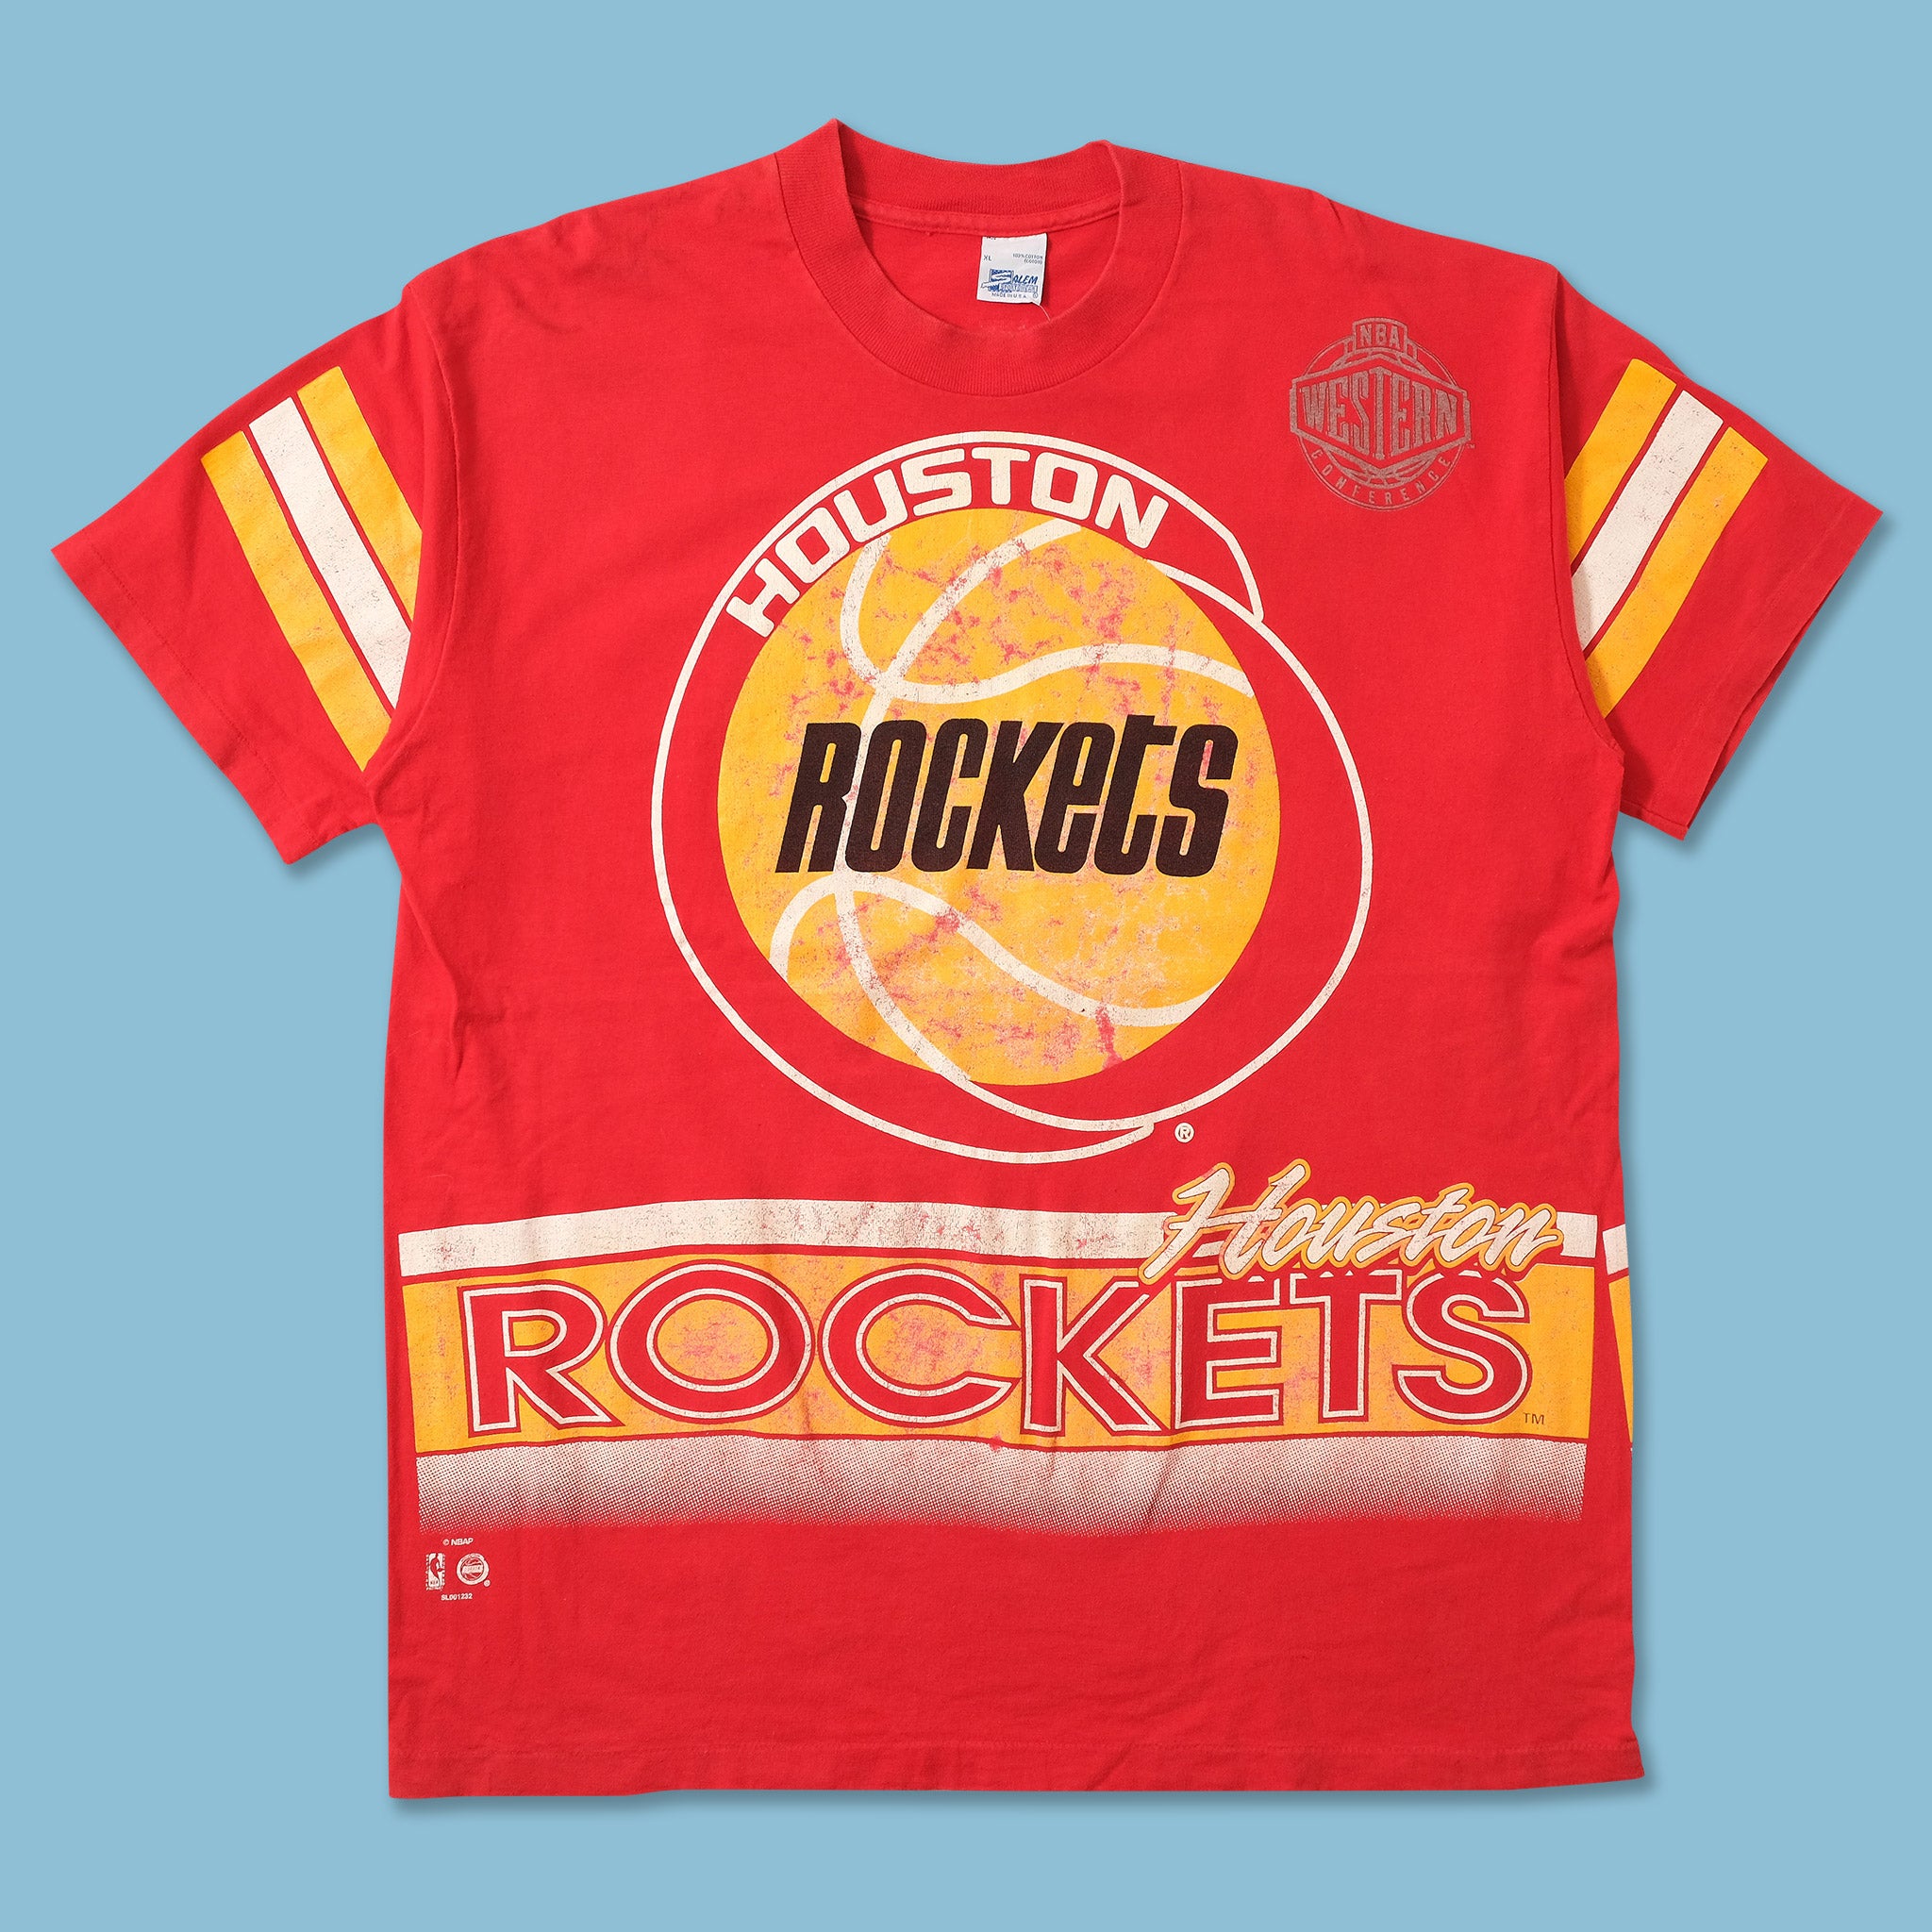 Houston Clutch City Rockets T-shirt Jersey S-5XL Youth Adult sizes